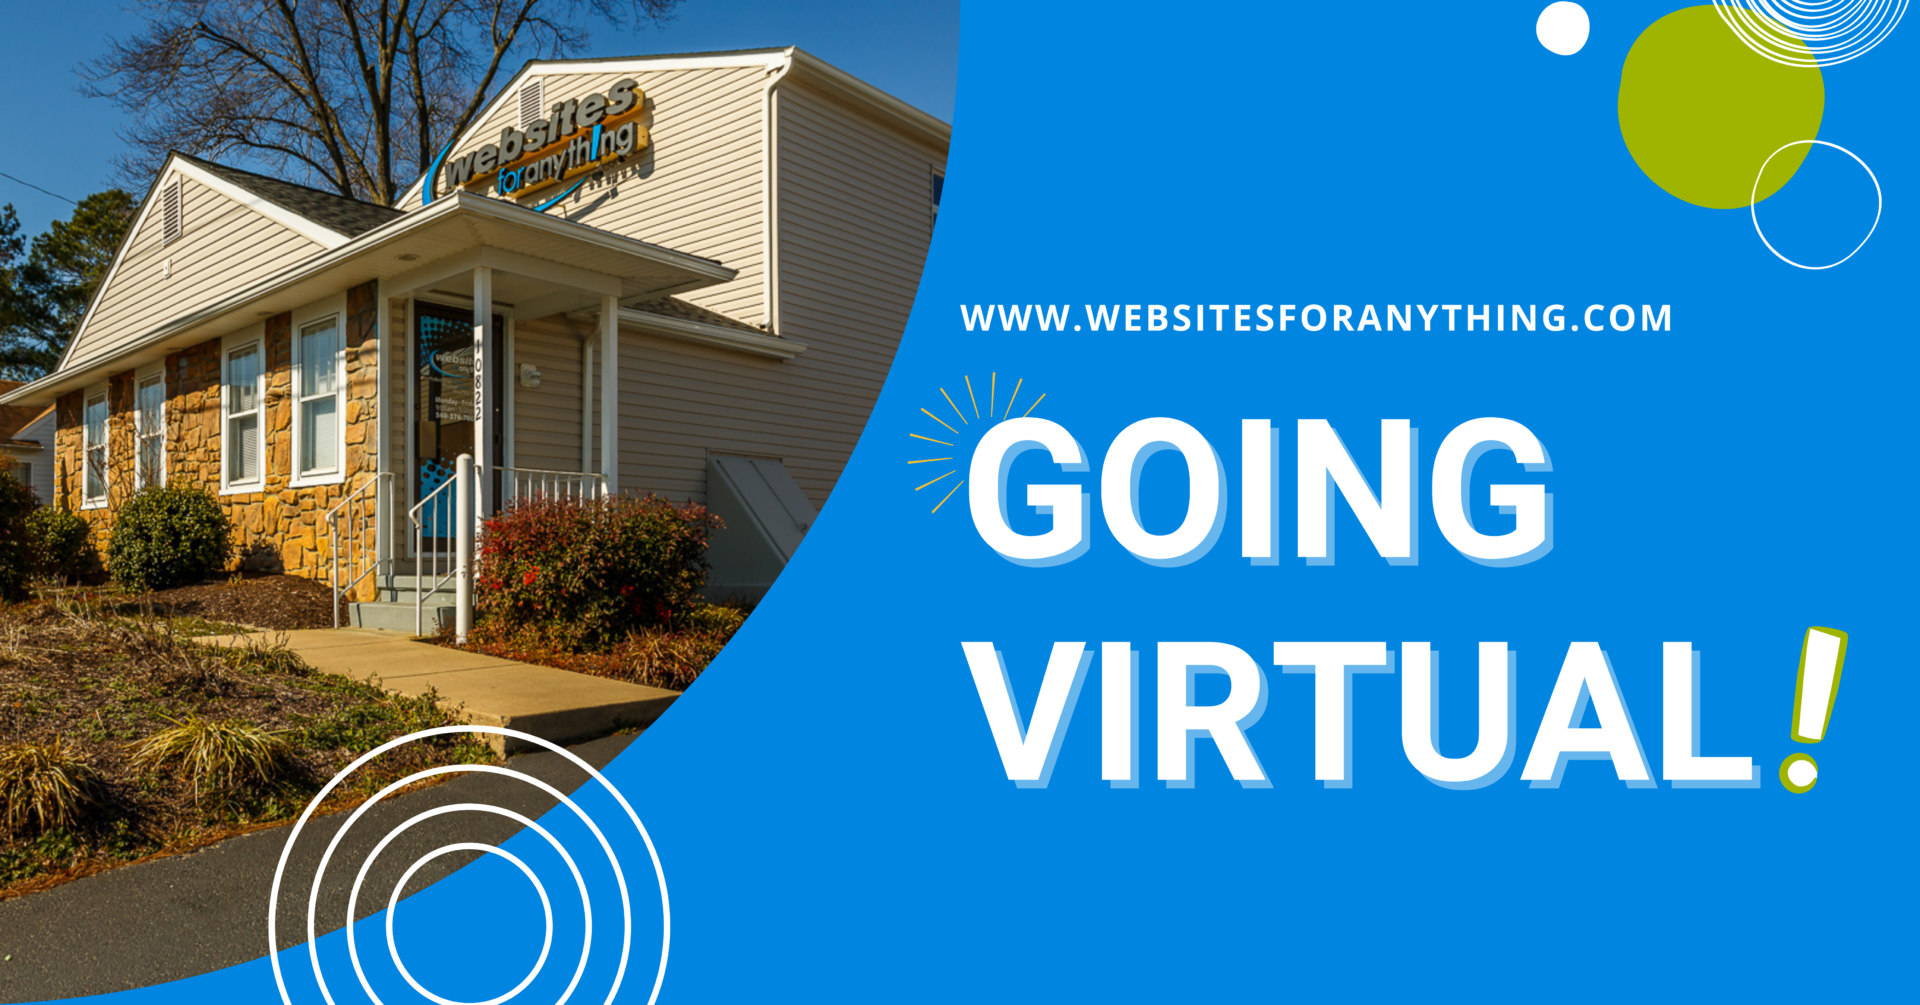 We Have Officially “Gone Virtual”!